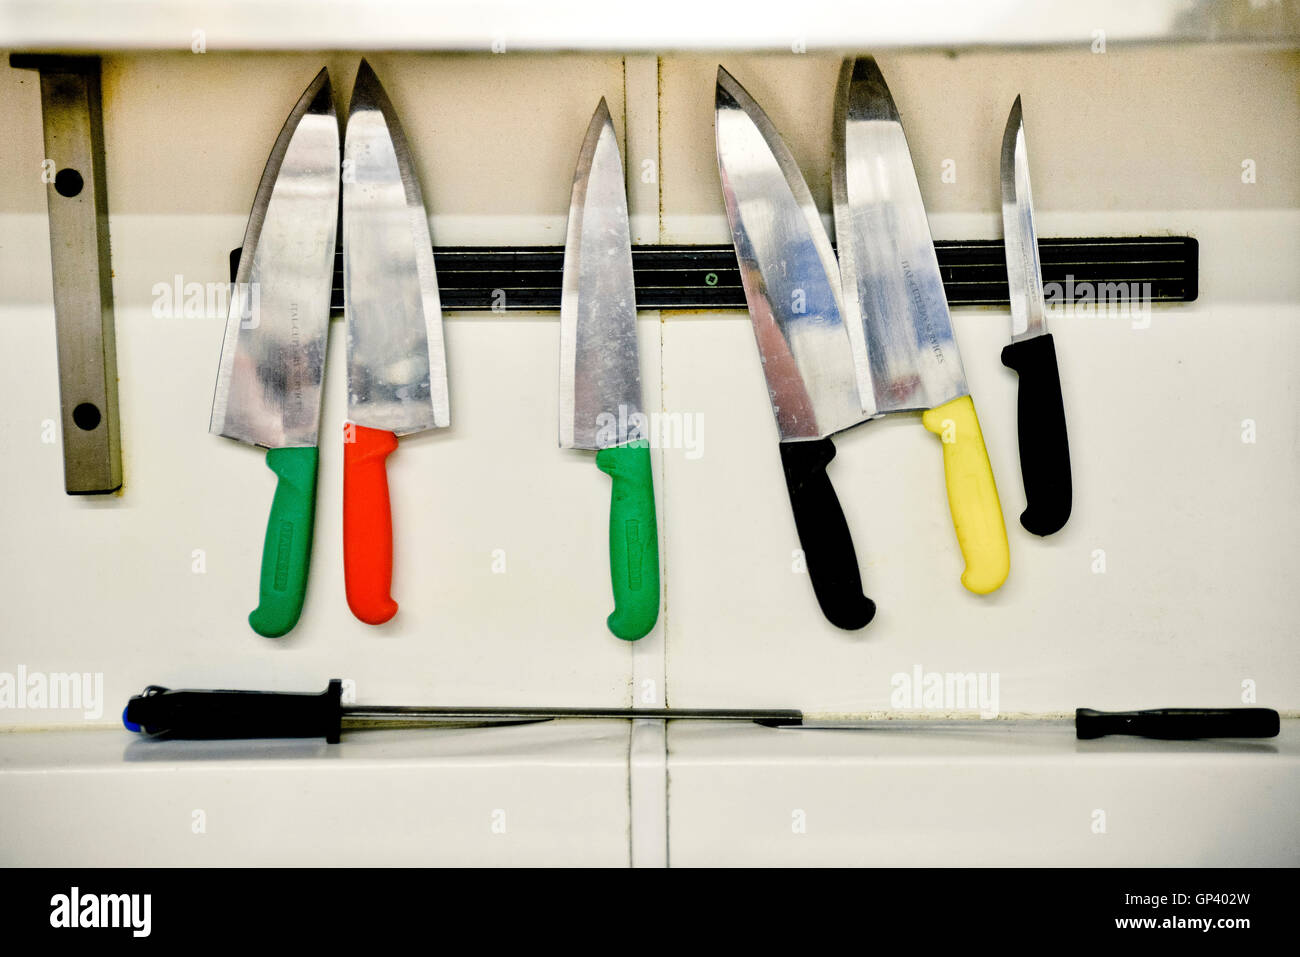 Knives hanging on magnectic strip Stock Photo